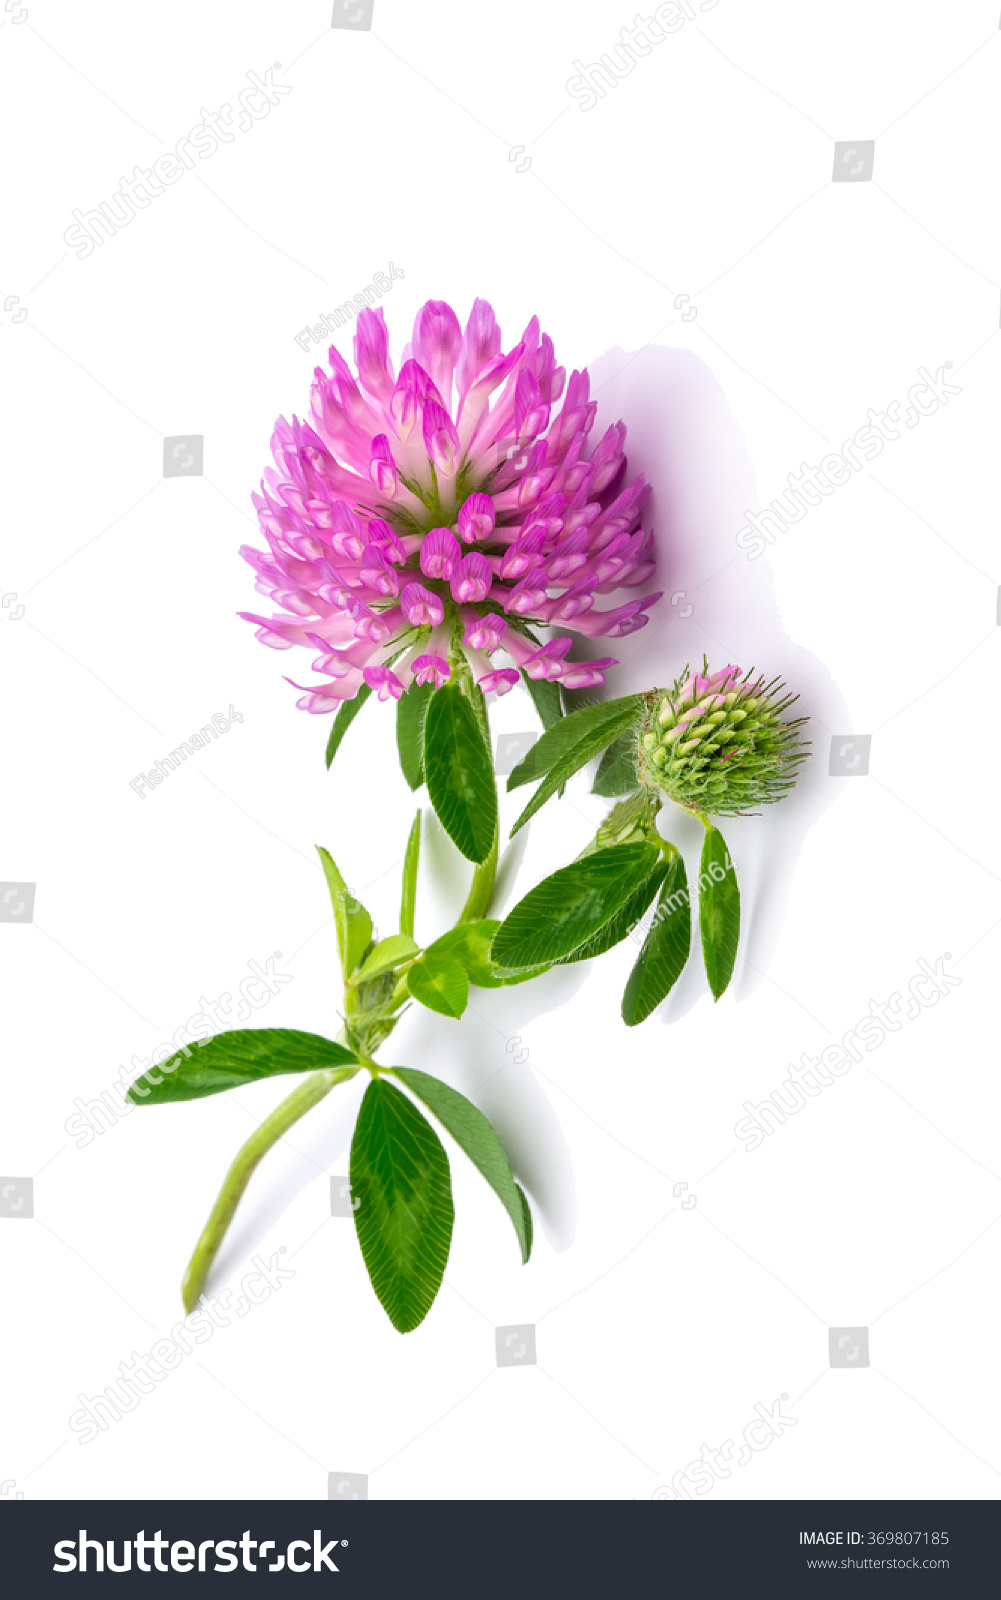 clover flowers isolated on white background #369807185